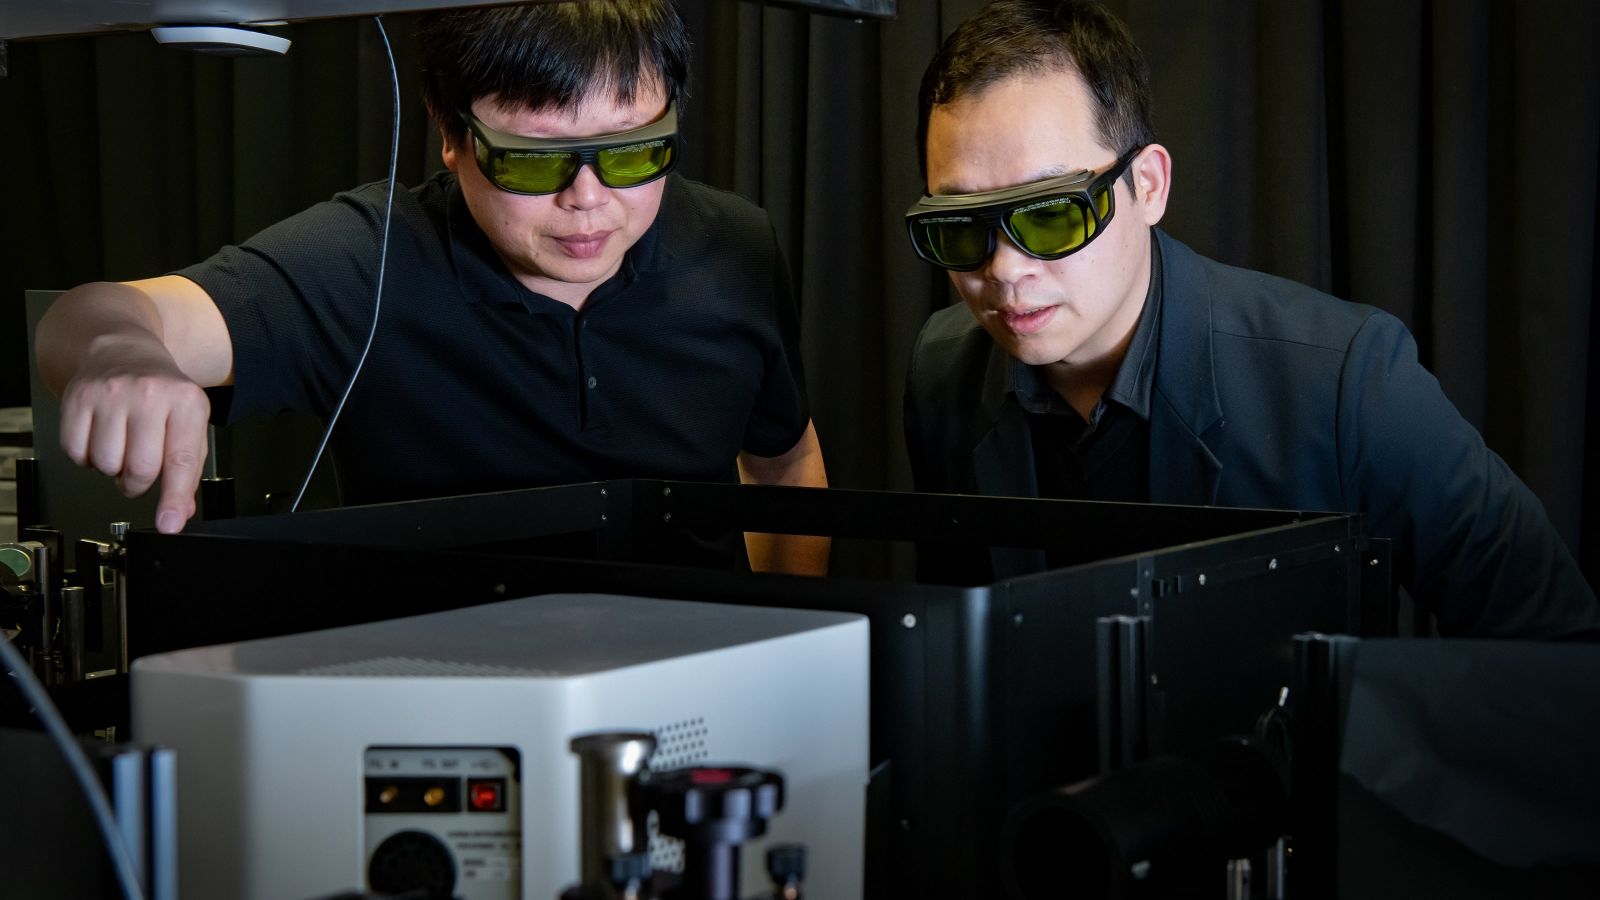 Two men wearing protective glasses looking at a laser spectroscopy machine in a dark room 